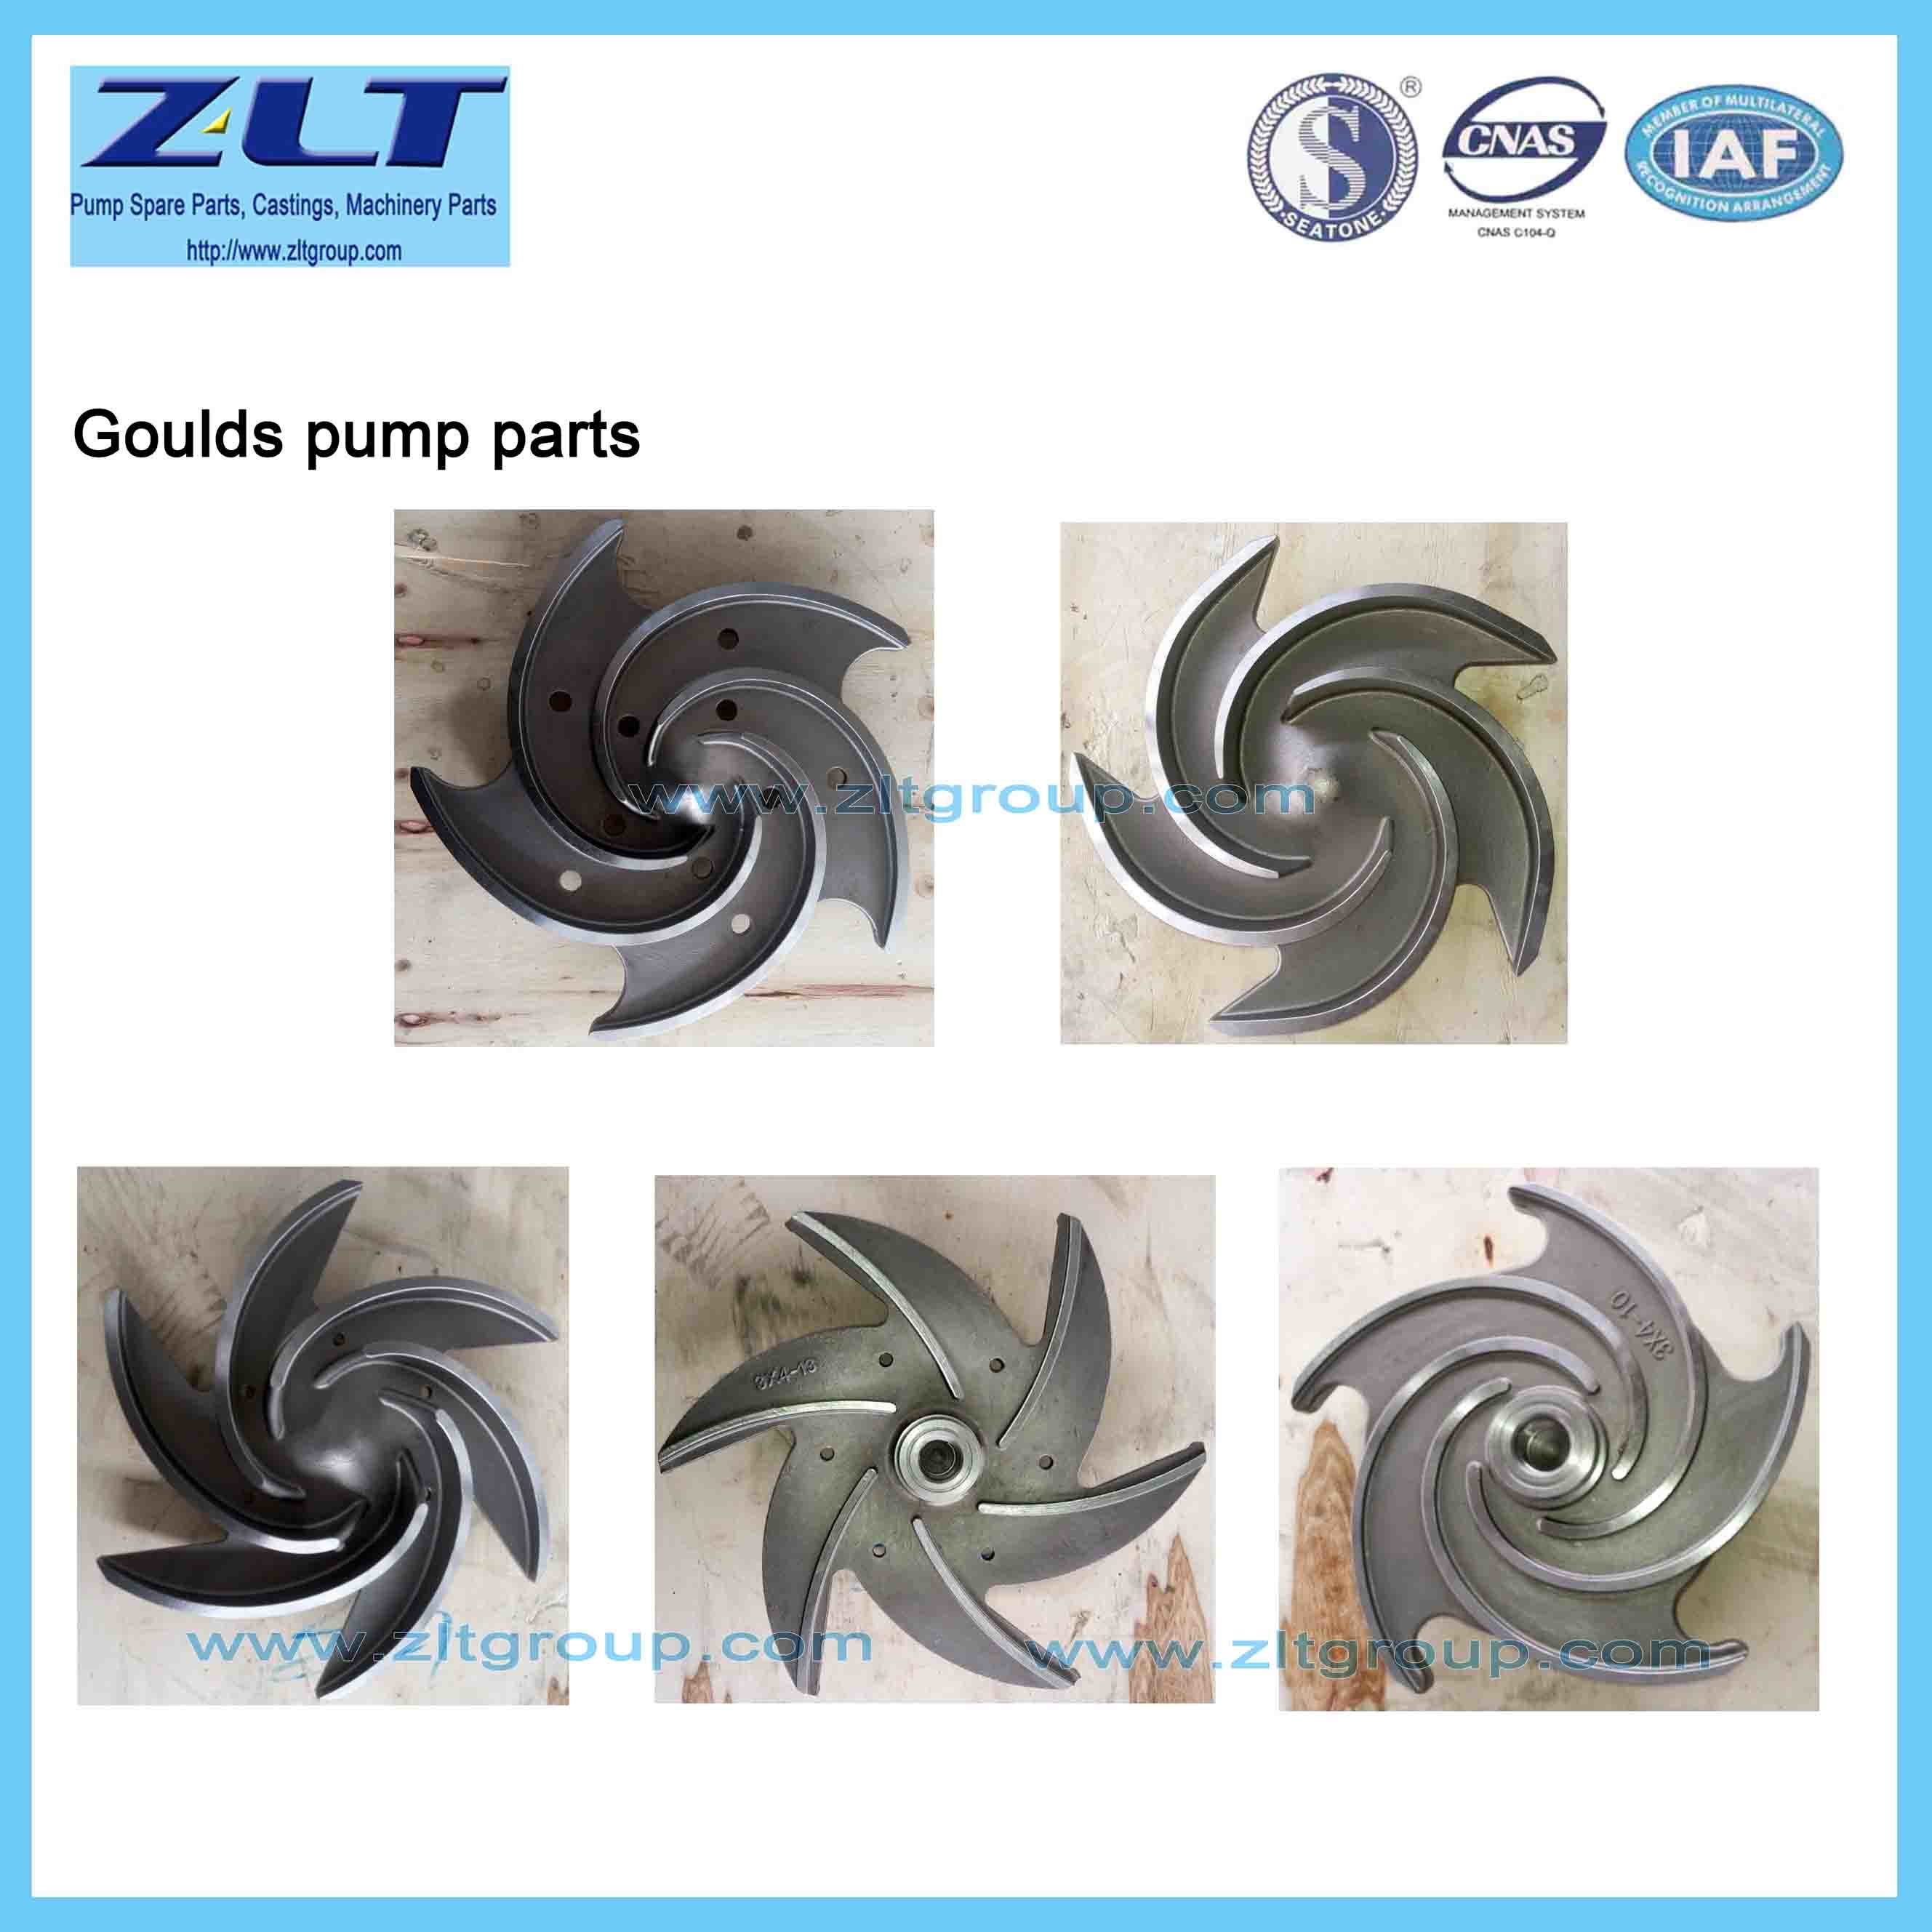 Investment Casting Lost Wax Casting